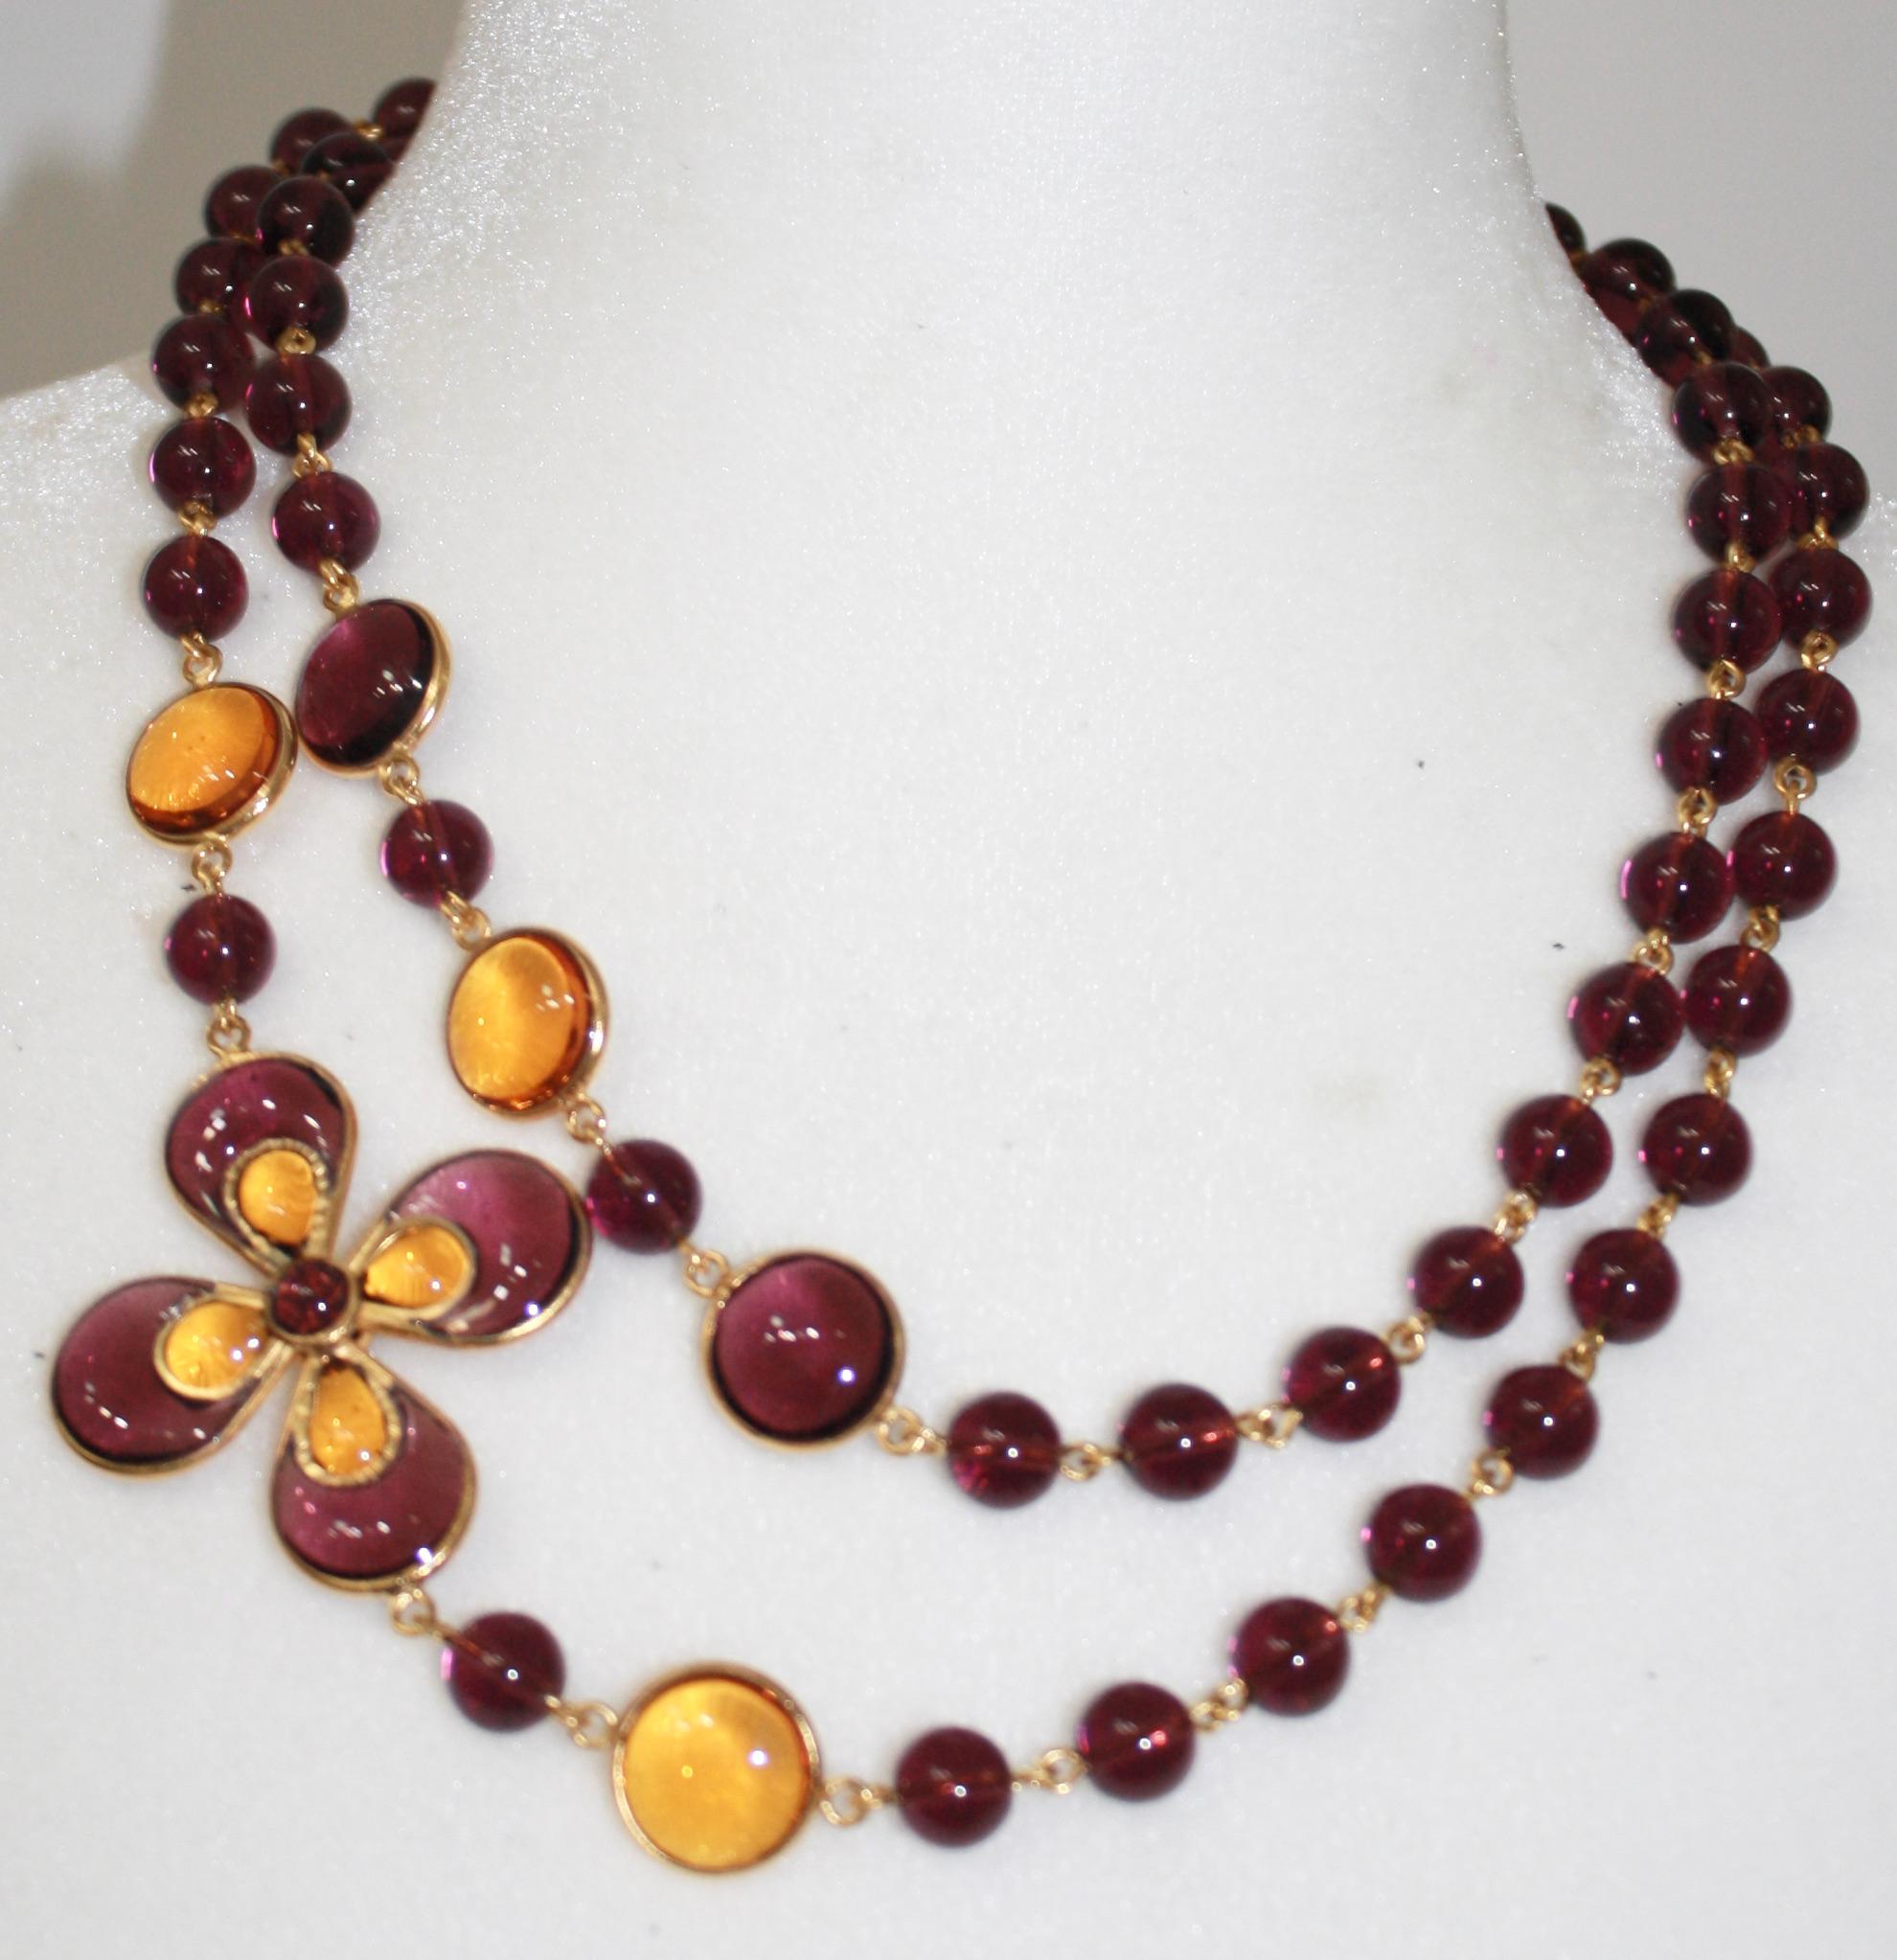 Purple and gold Gripoix work late de verre necklace . Can be worn doubled as well .
Flower motif is 1.75”